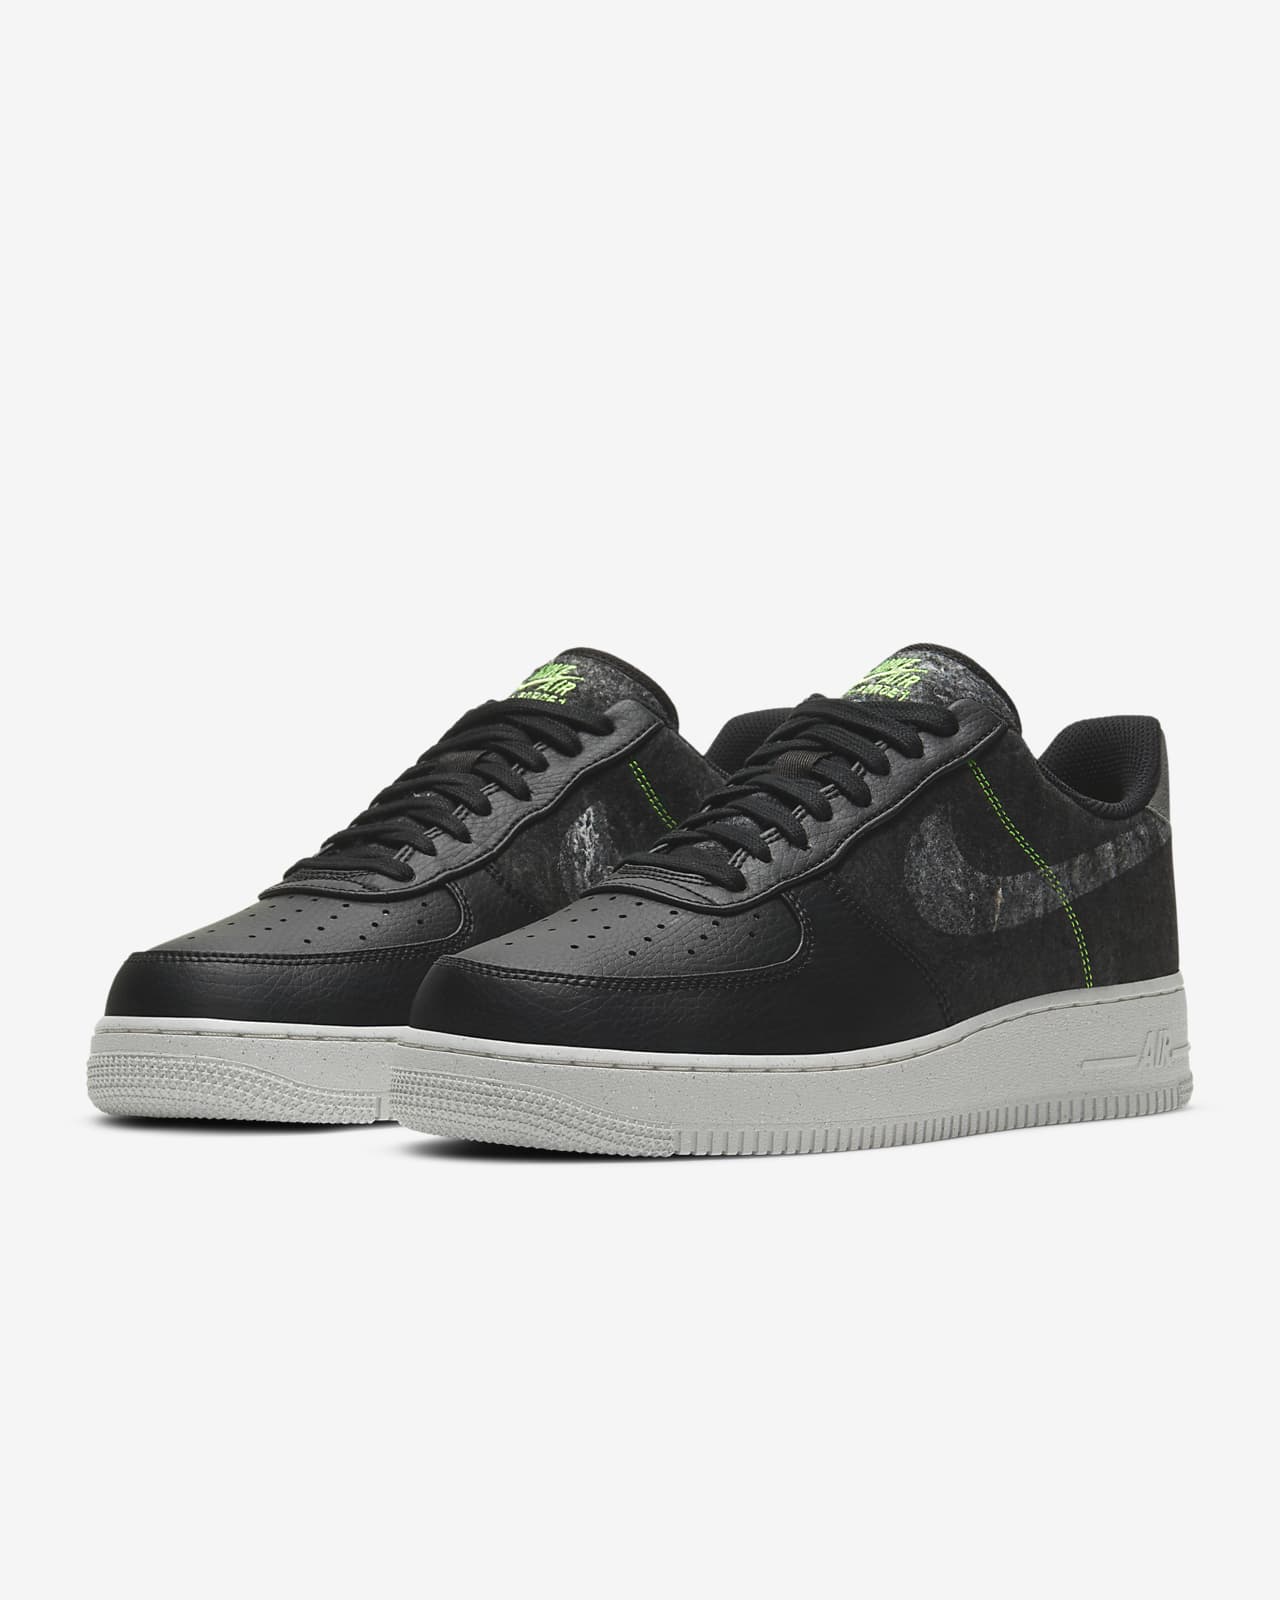 mike air force 1